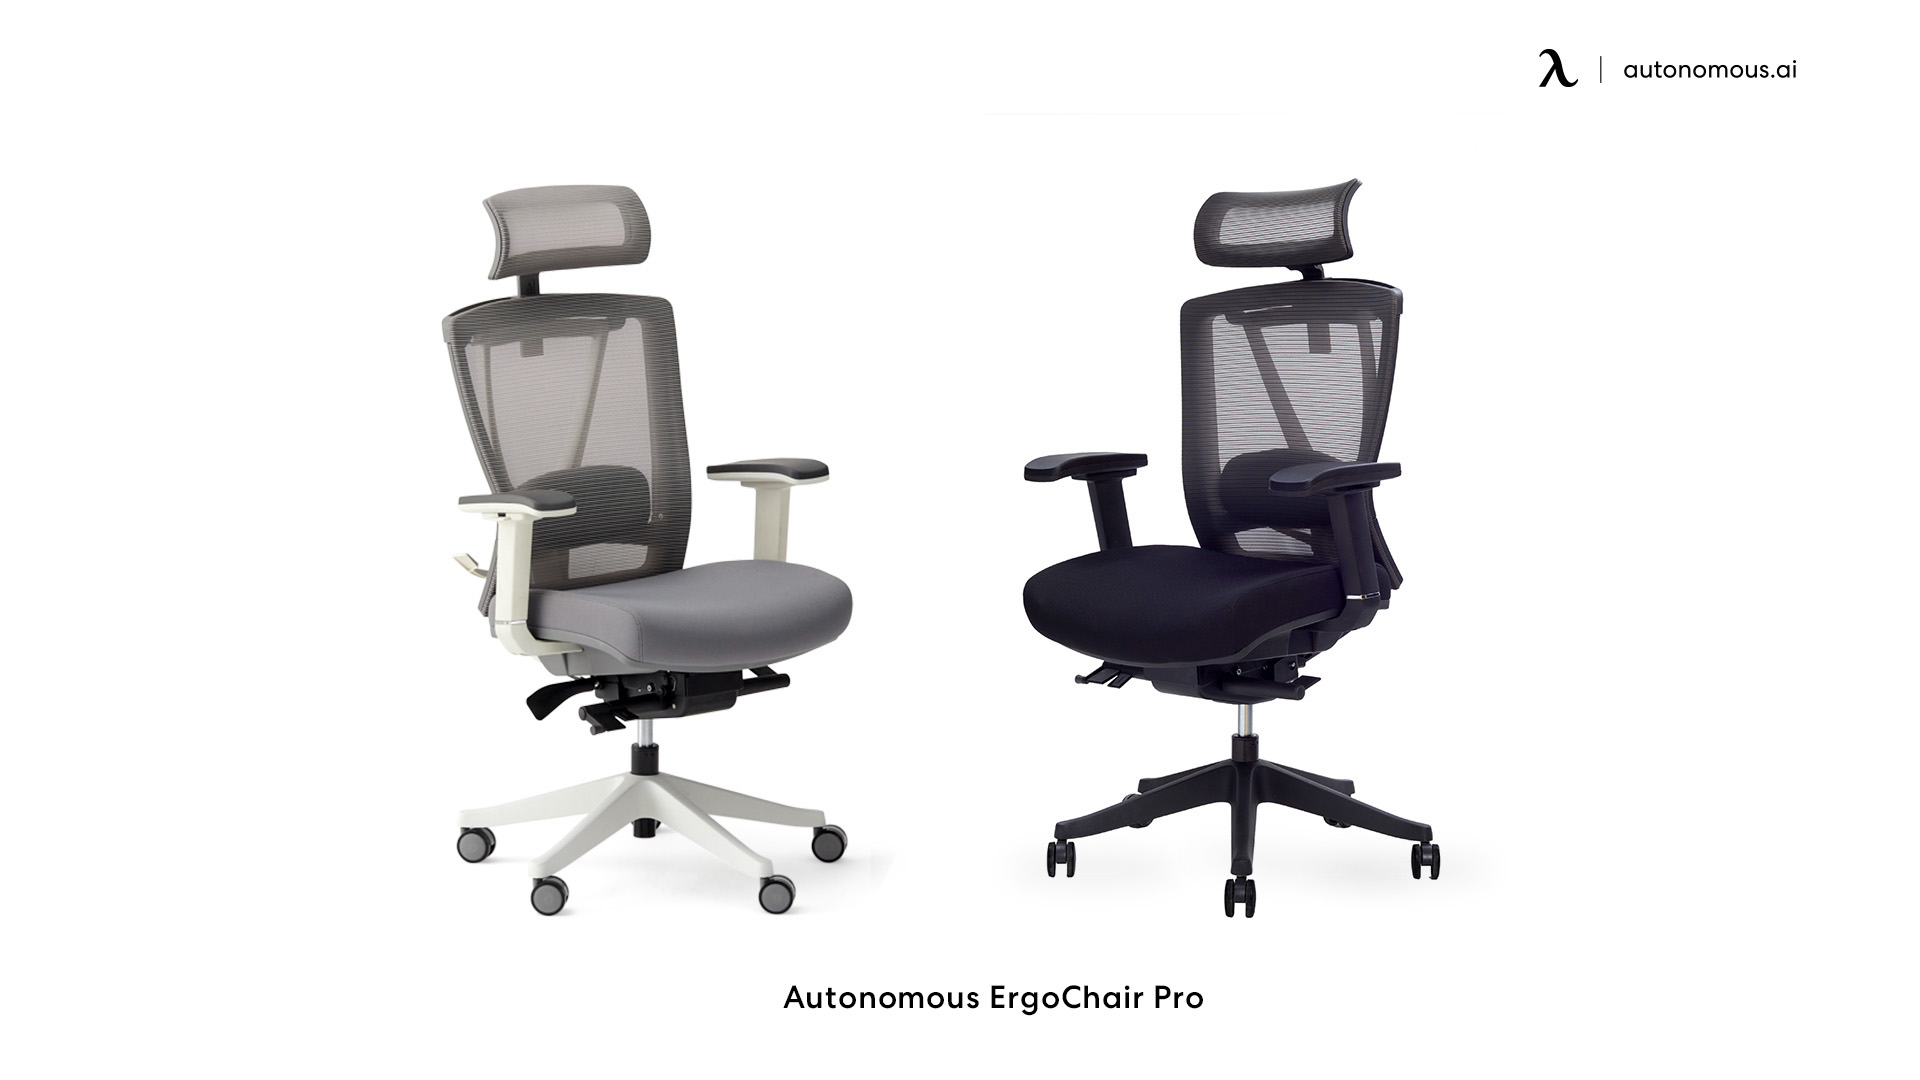 ErgoChair Pro home office chair with back support